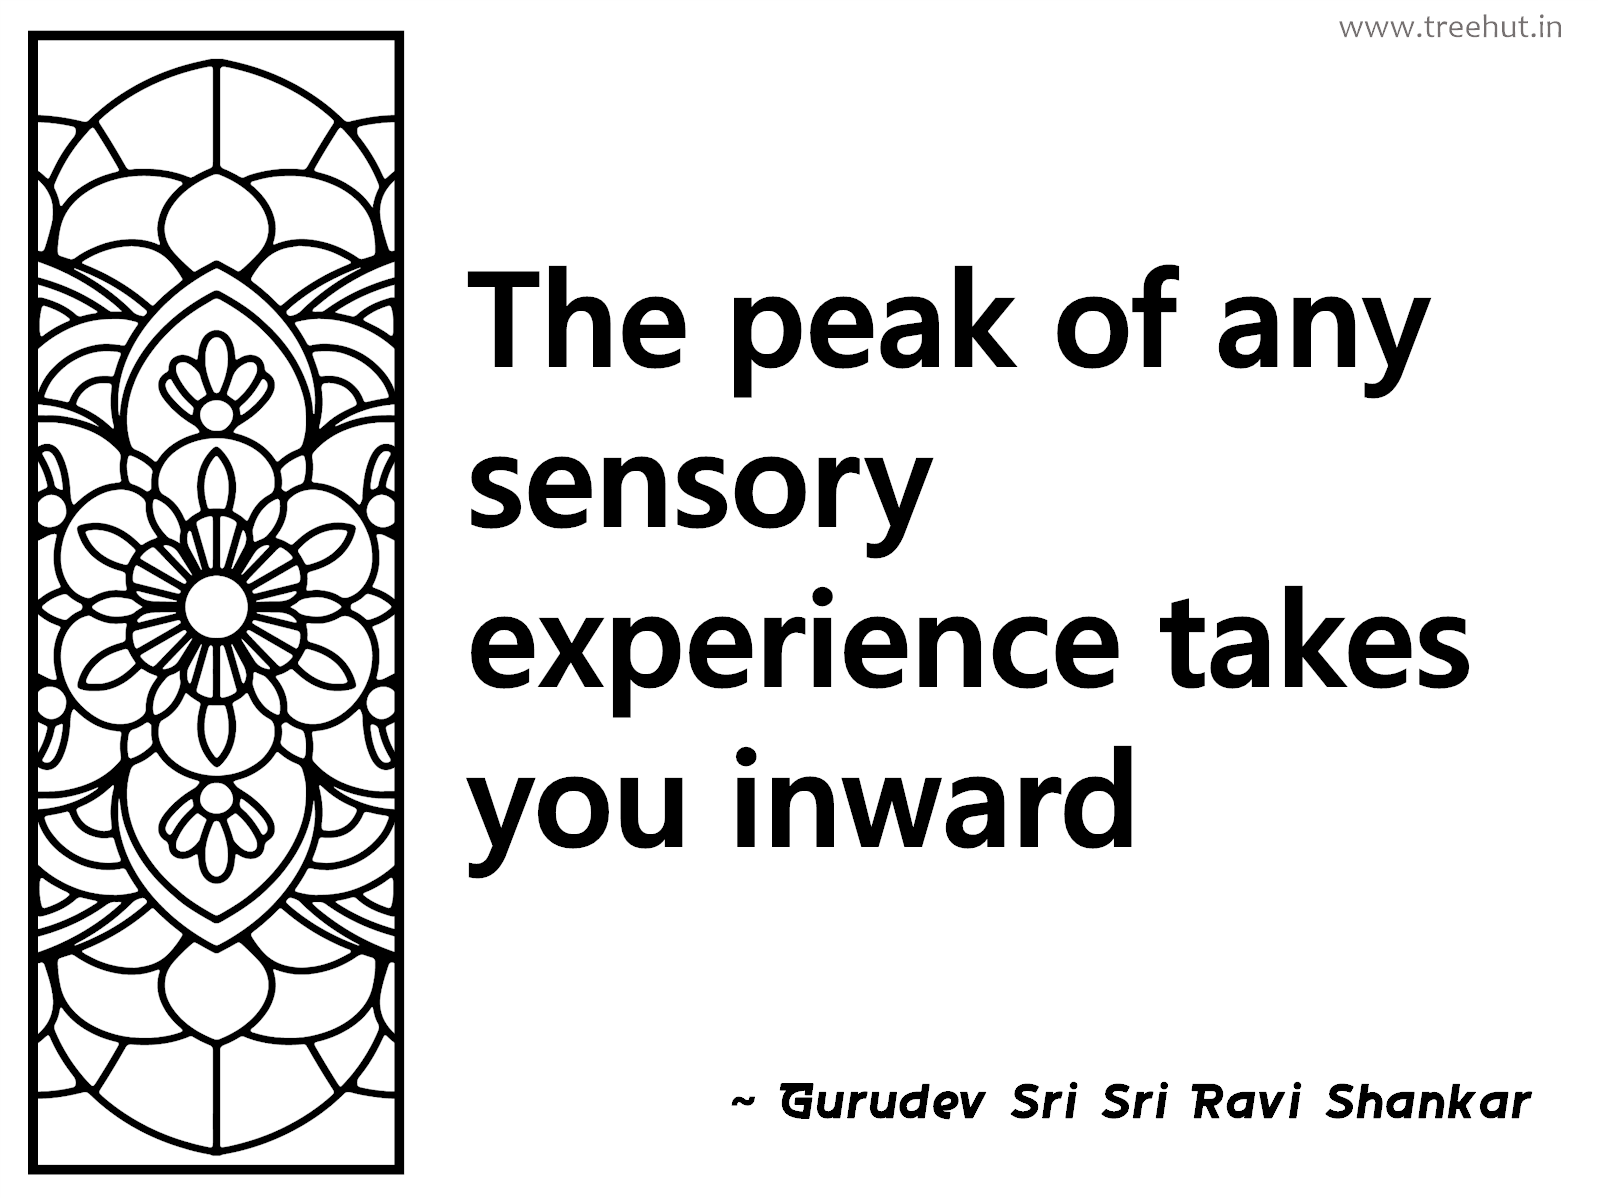 The peak of any sensory experience takes you inward Inspirational Quote by Gurudev Sri Sri Ravi Shankar, coloring pages